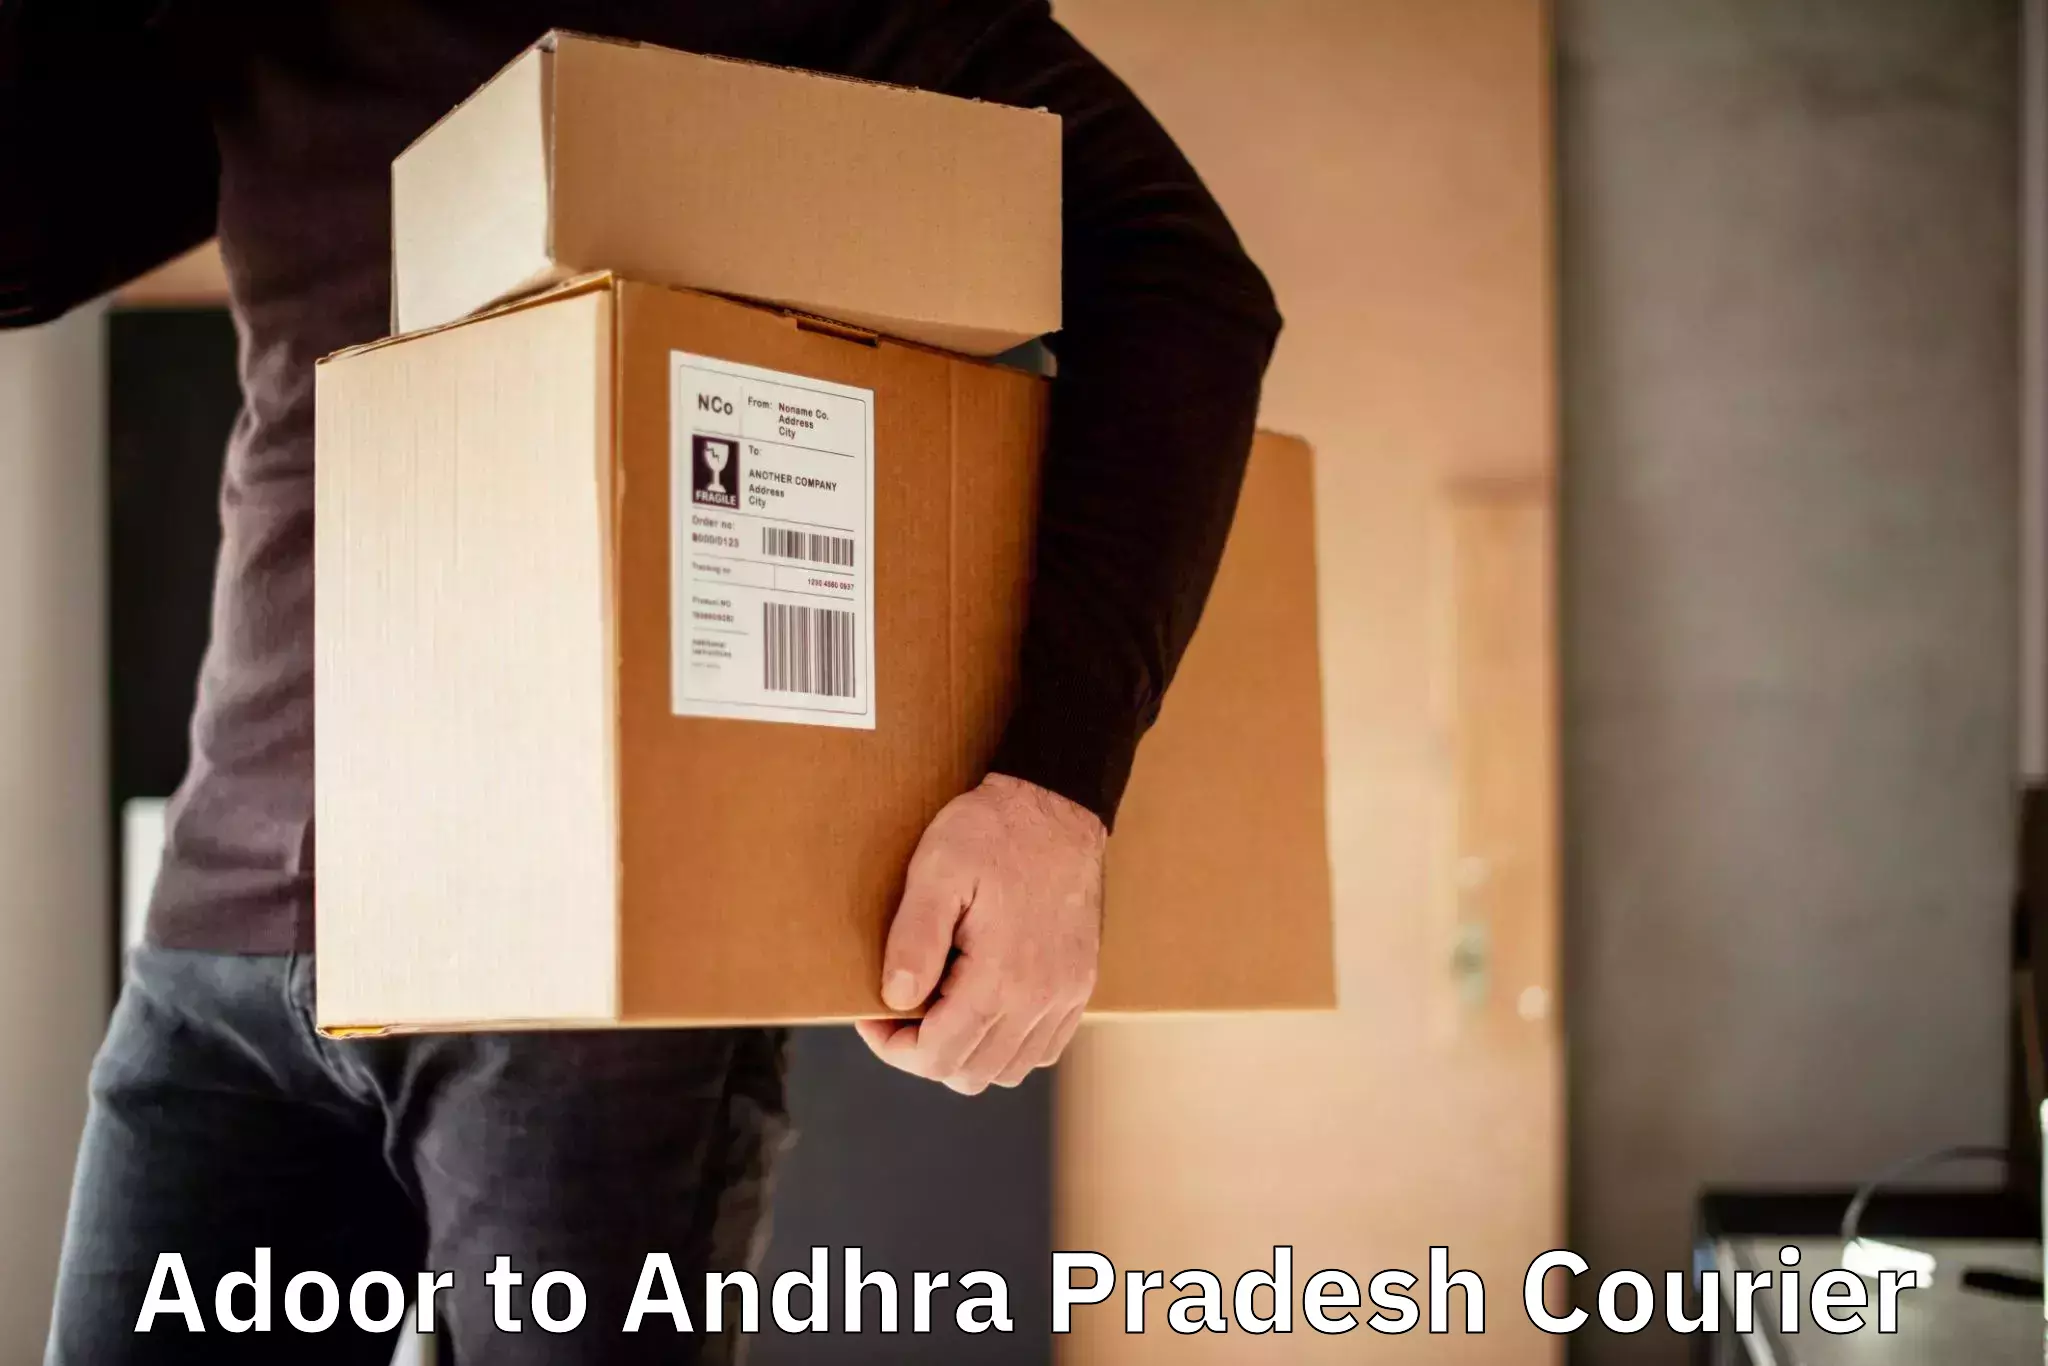 State-of-the-art courier technology Adoor to Tiruvuru